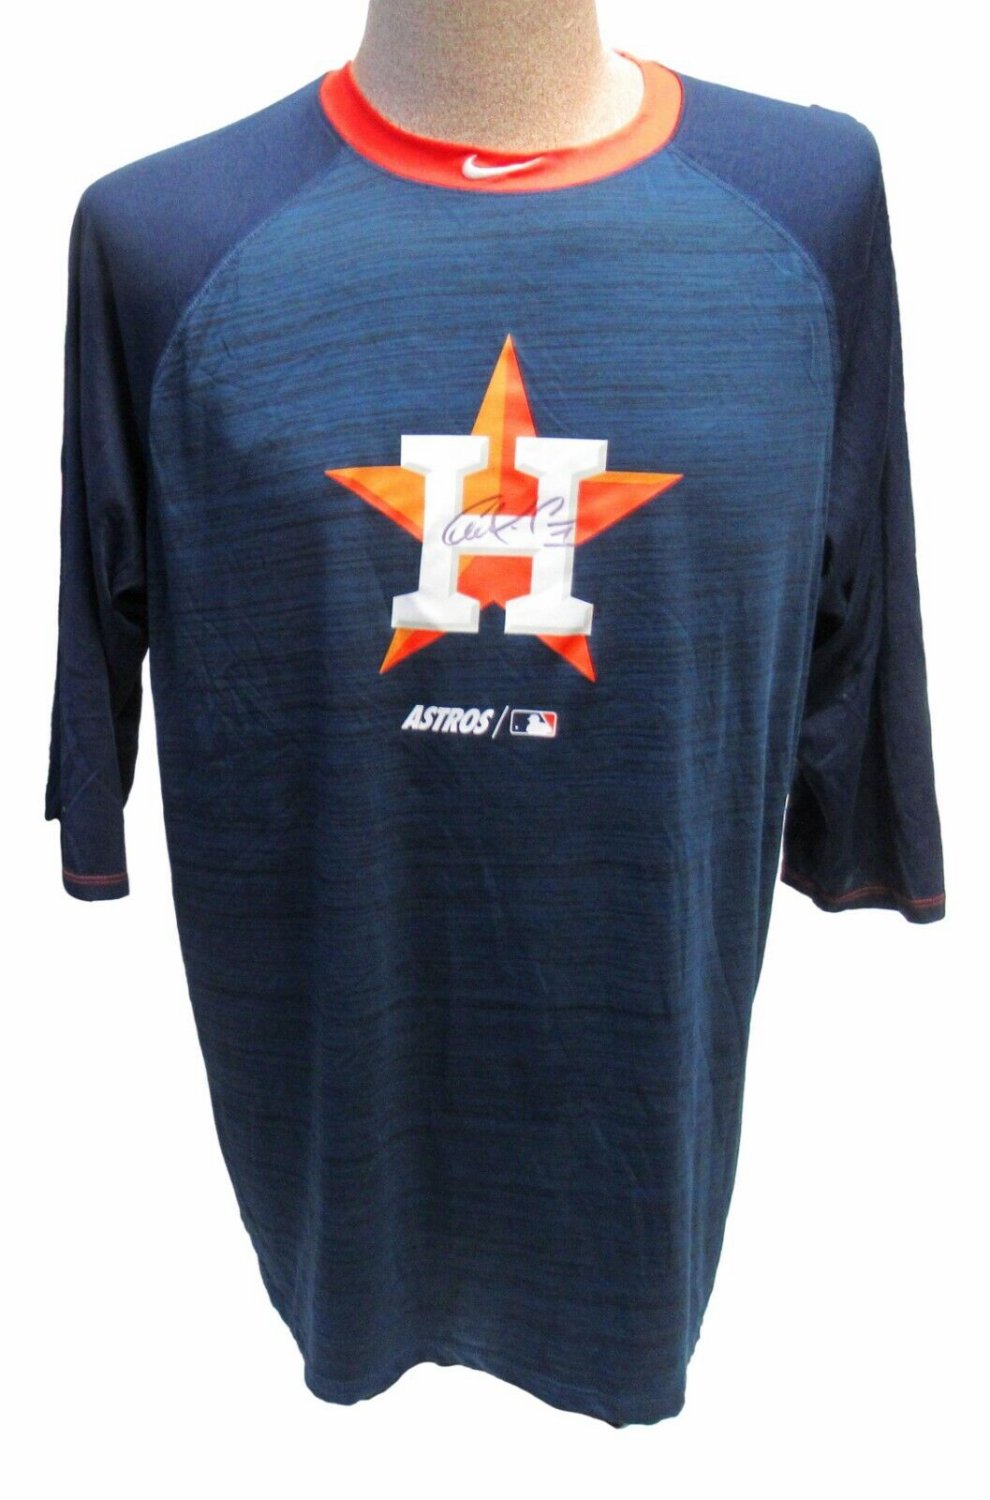 Carlos Correa Autographed Signed Autograph Game Worn Used Batting Practice  Shirt PSA/DNA